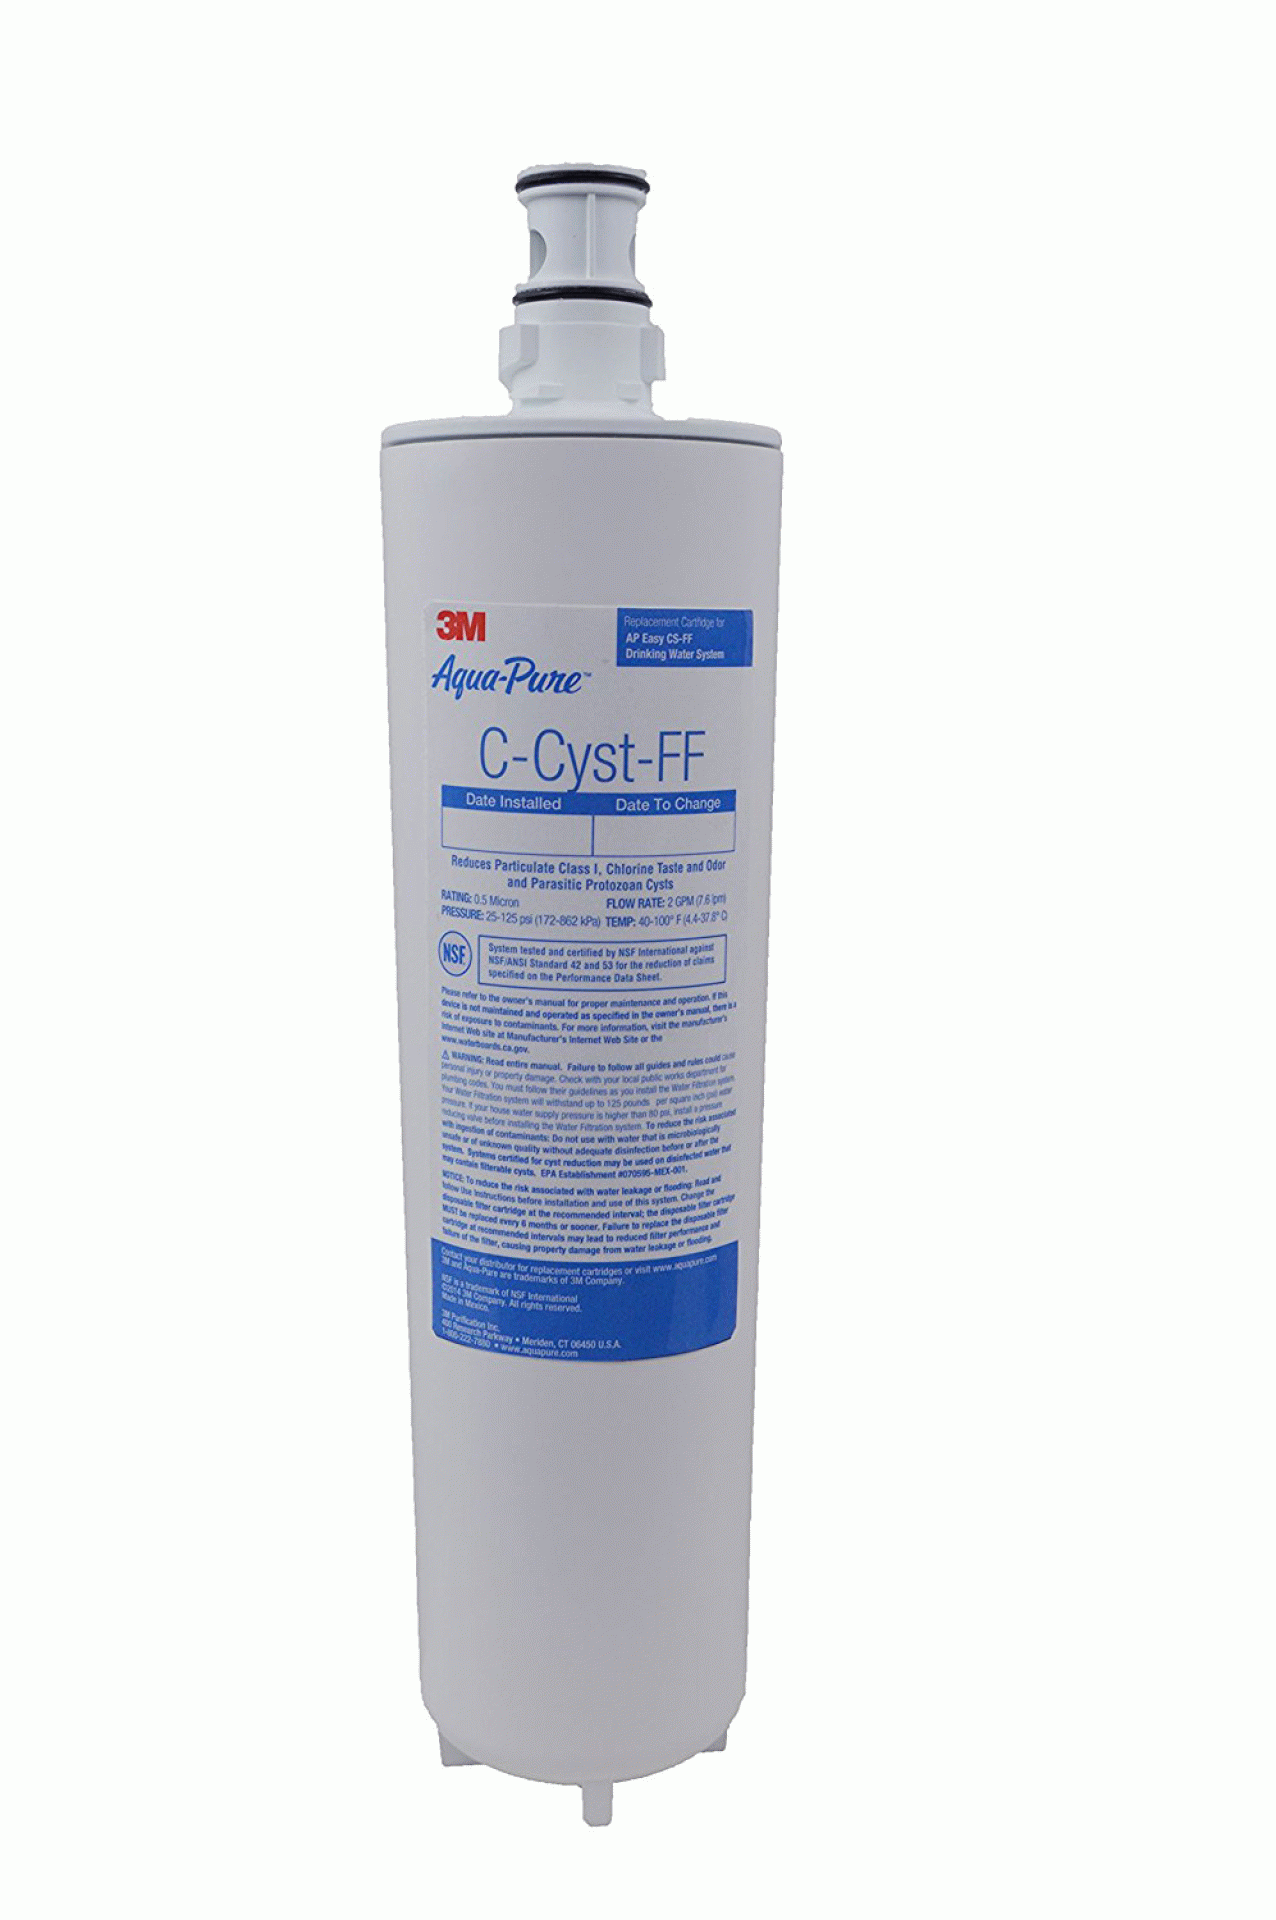 3M Company | 70020109529 | WATER Filter Replacement for C-CYST-FF